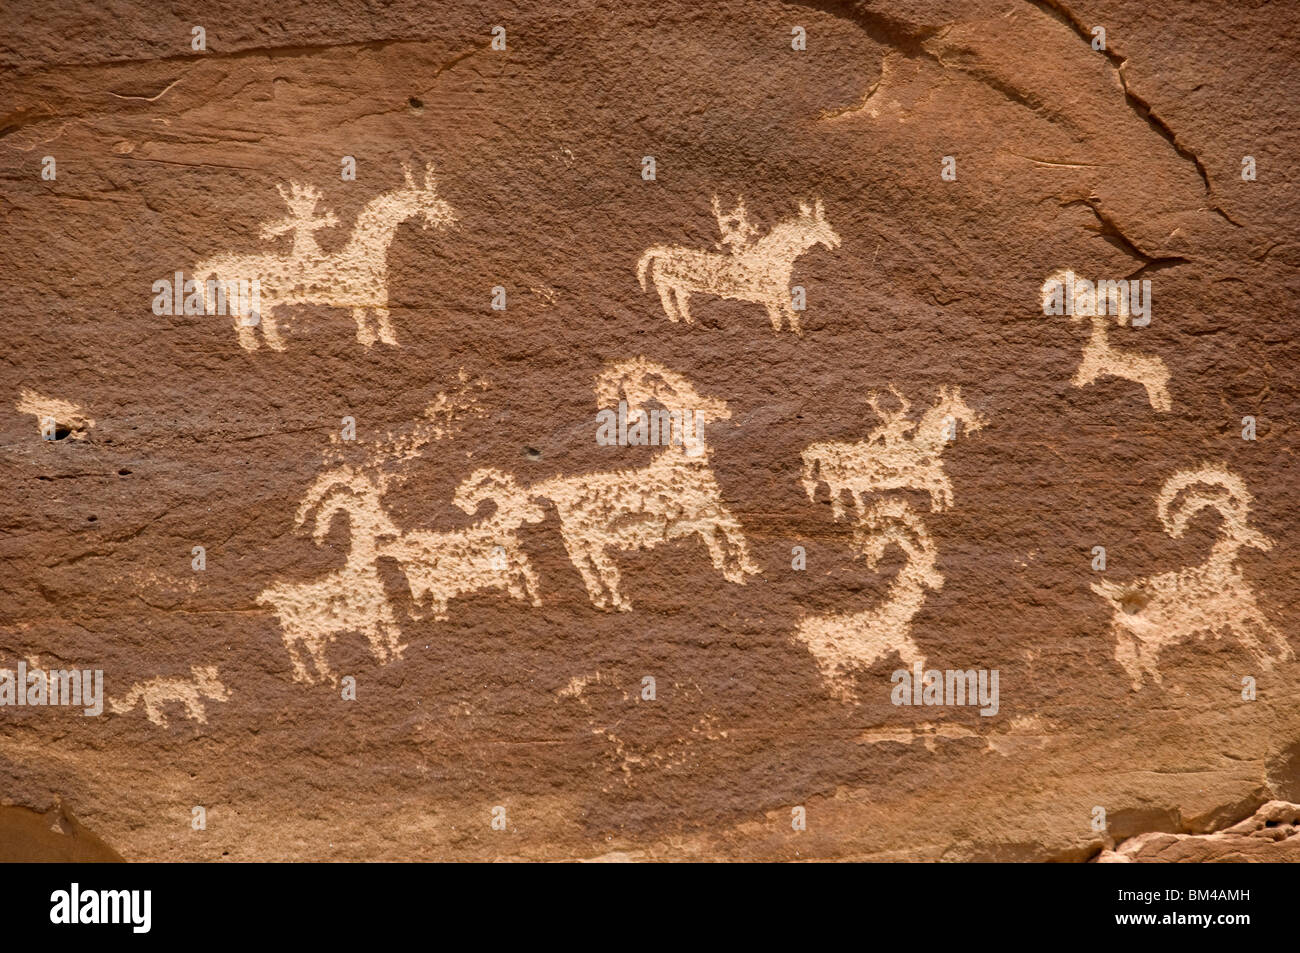 Petroglyph on rock featuring shepherds or hunters on horseback with sheep or goats, Arches National Park, Utah, USA Stock Photo